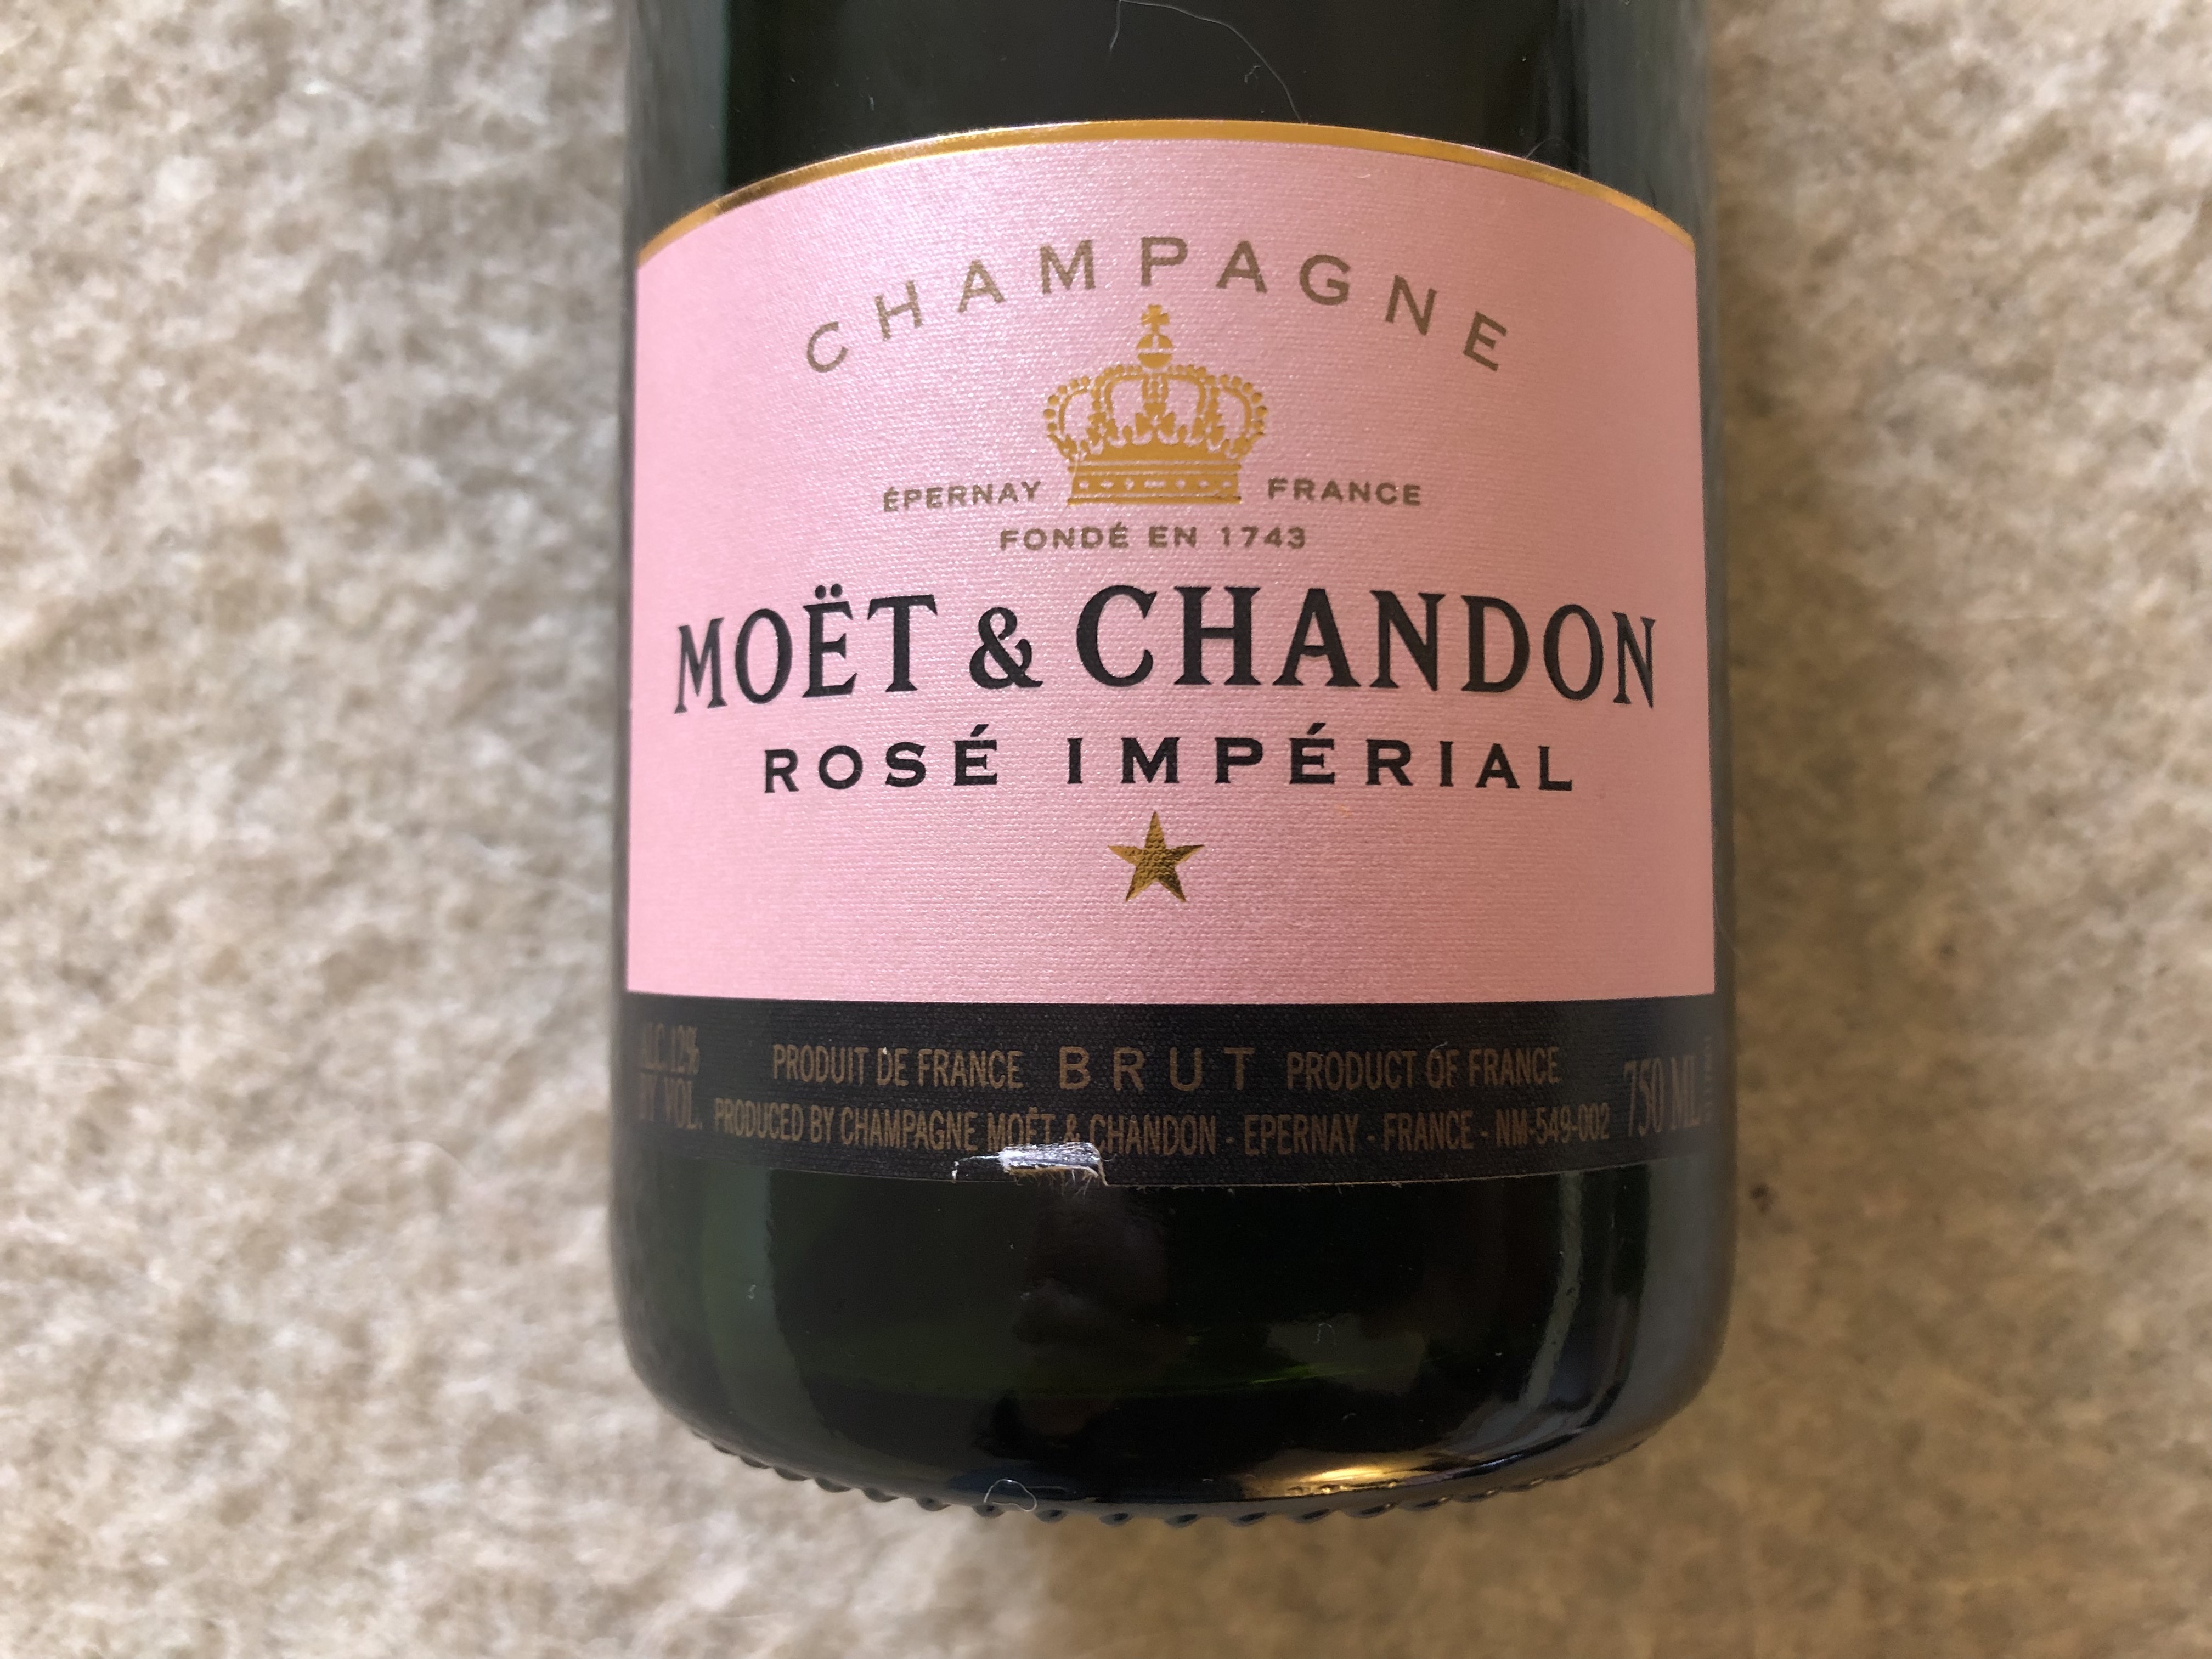 Moet & Chandon - Brut Rose Champagne Imperial - Mid Valley Wine & Liquor